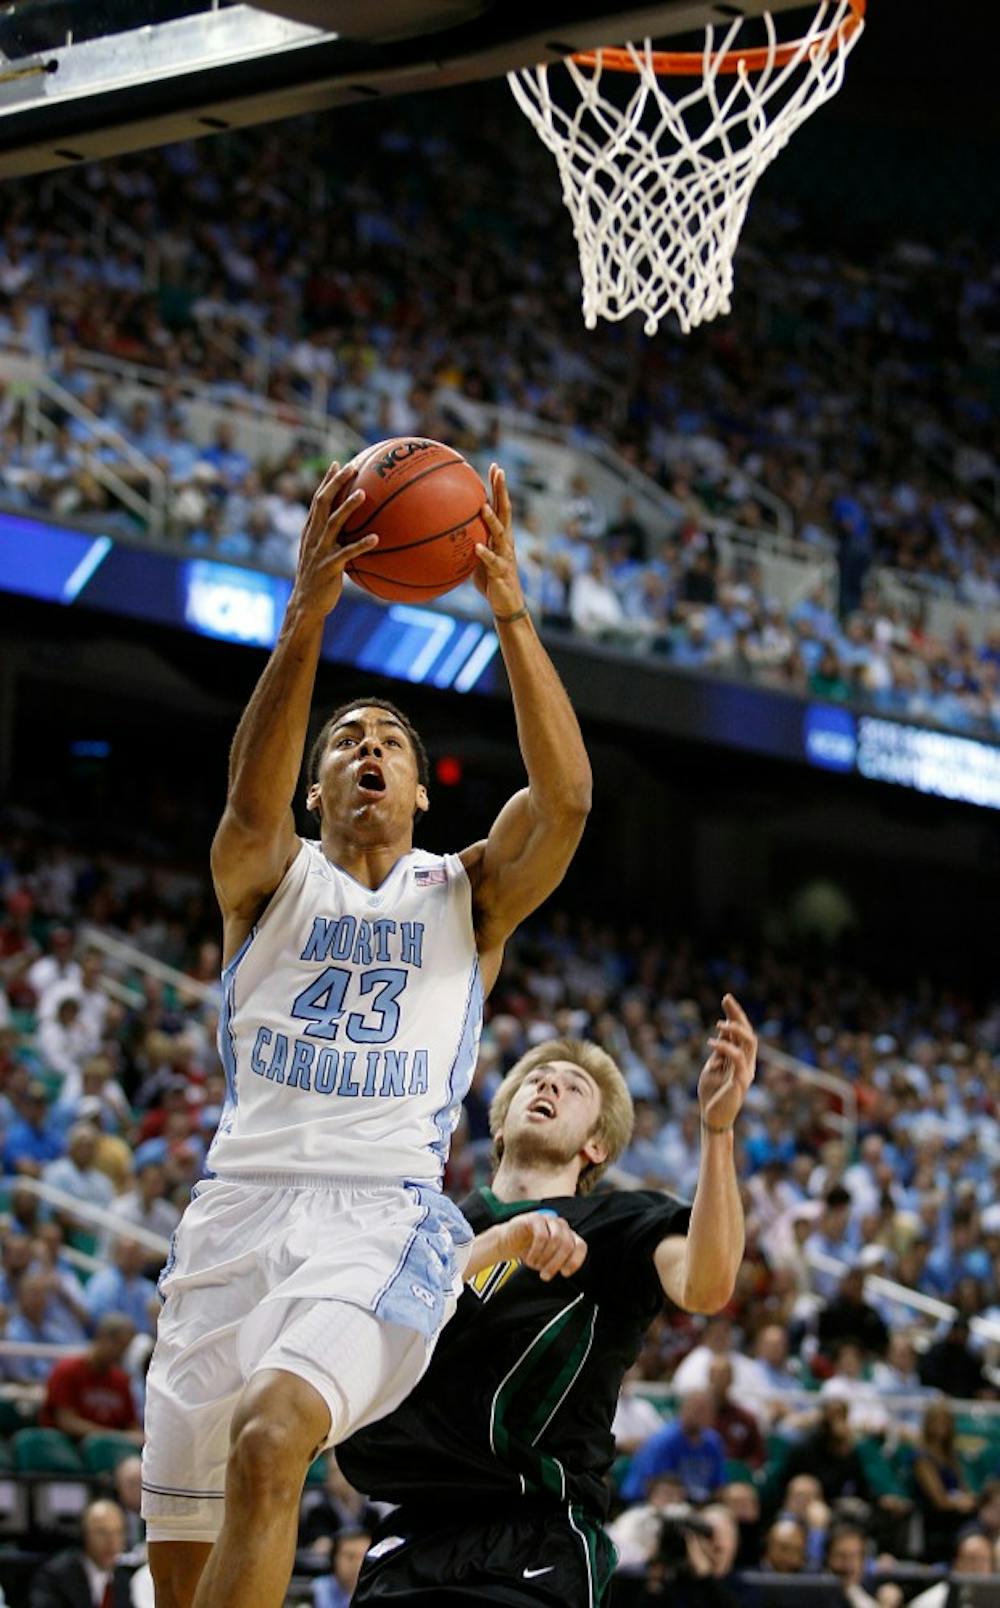 UNC forward James Michael McAdoo drives to the hoop. McAdoo had 17 points in the Tar Heels 77-58 win over Vermont in the second round of the NCAA tournament at the Greensboro Coliseum on Friday, March 16, 2012.